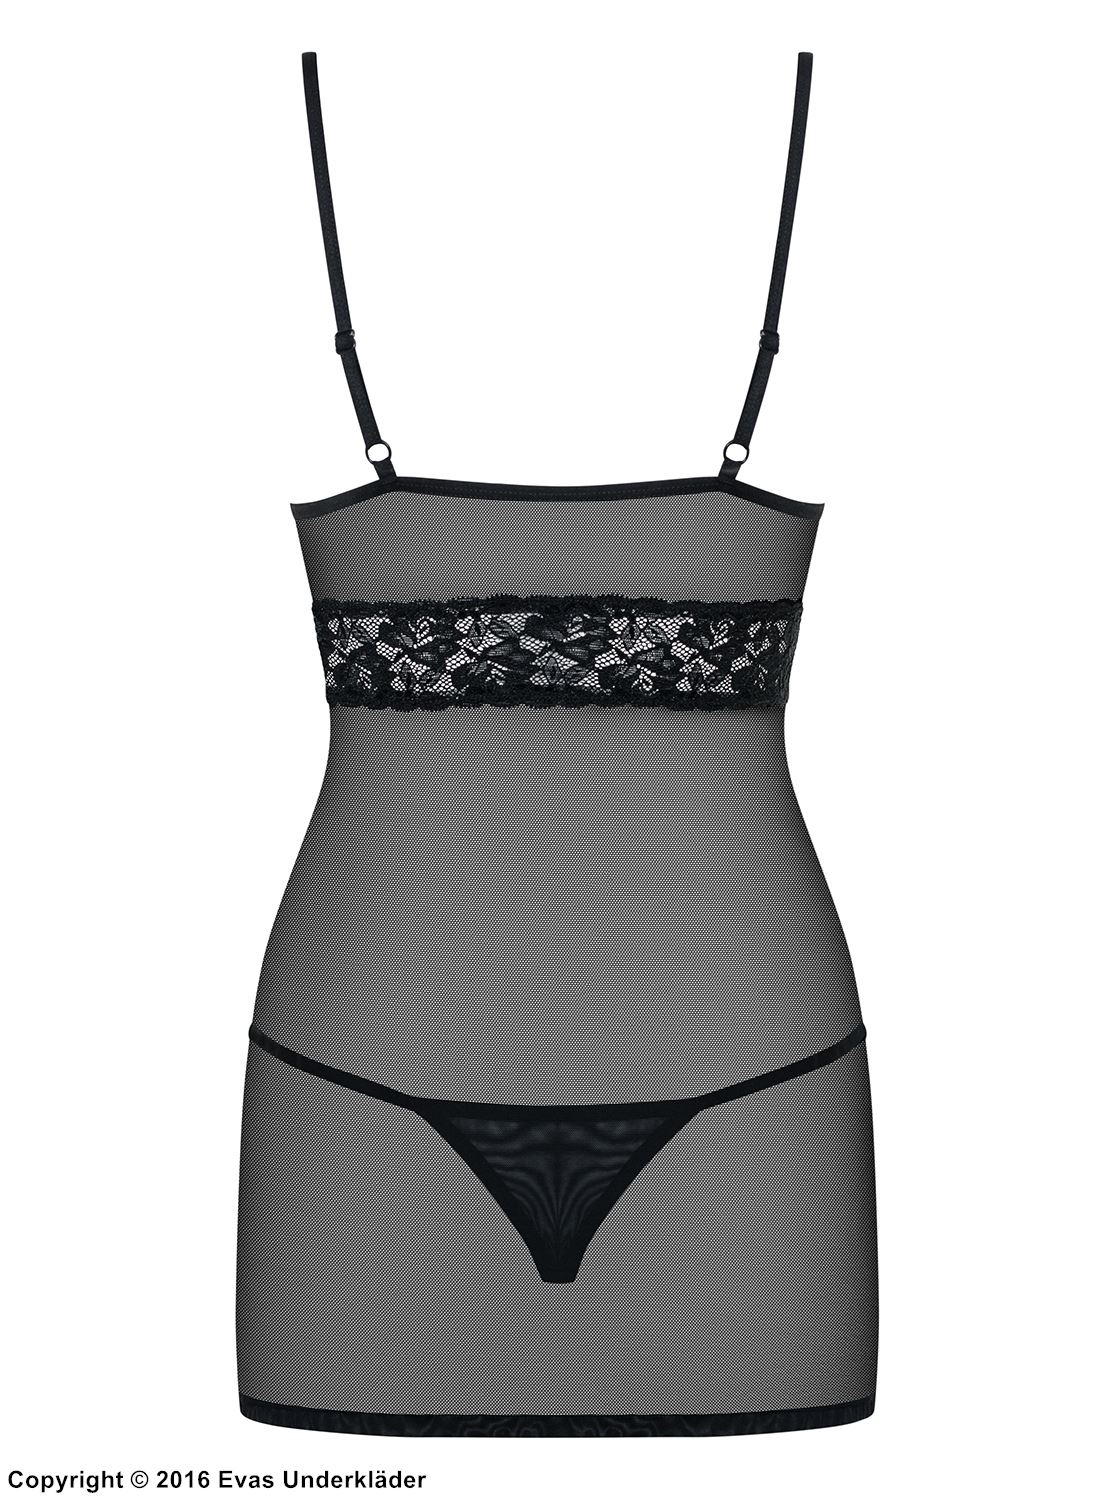 Skin-tight chemise, see-through mesh, lace inlay, pearls